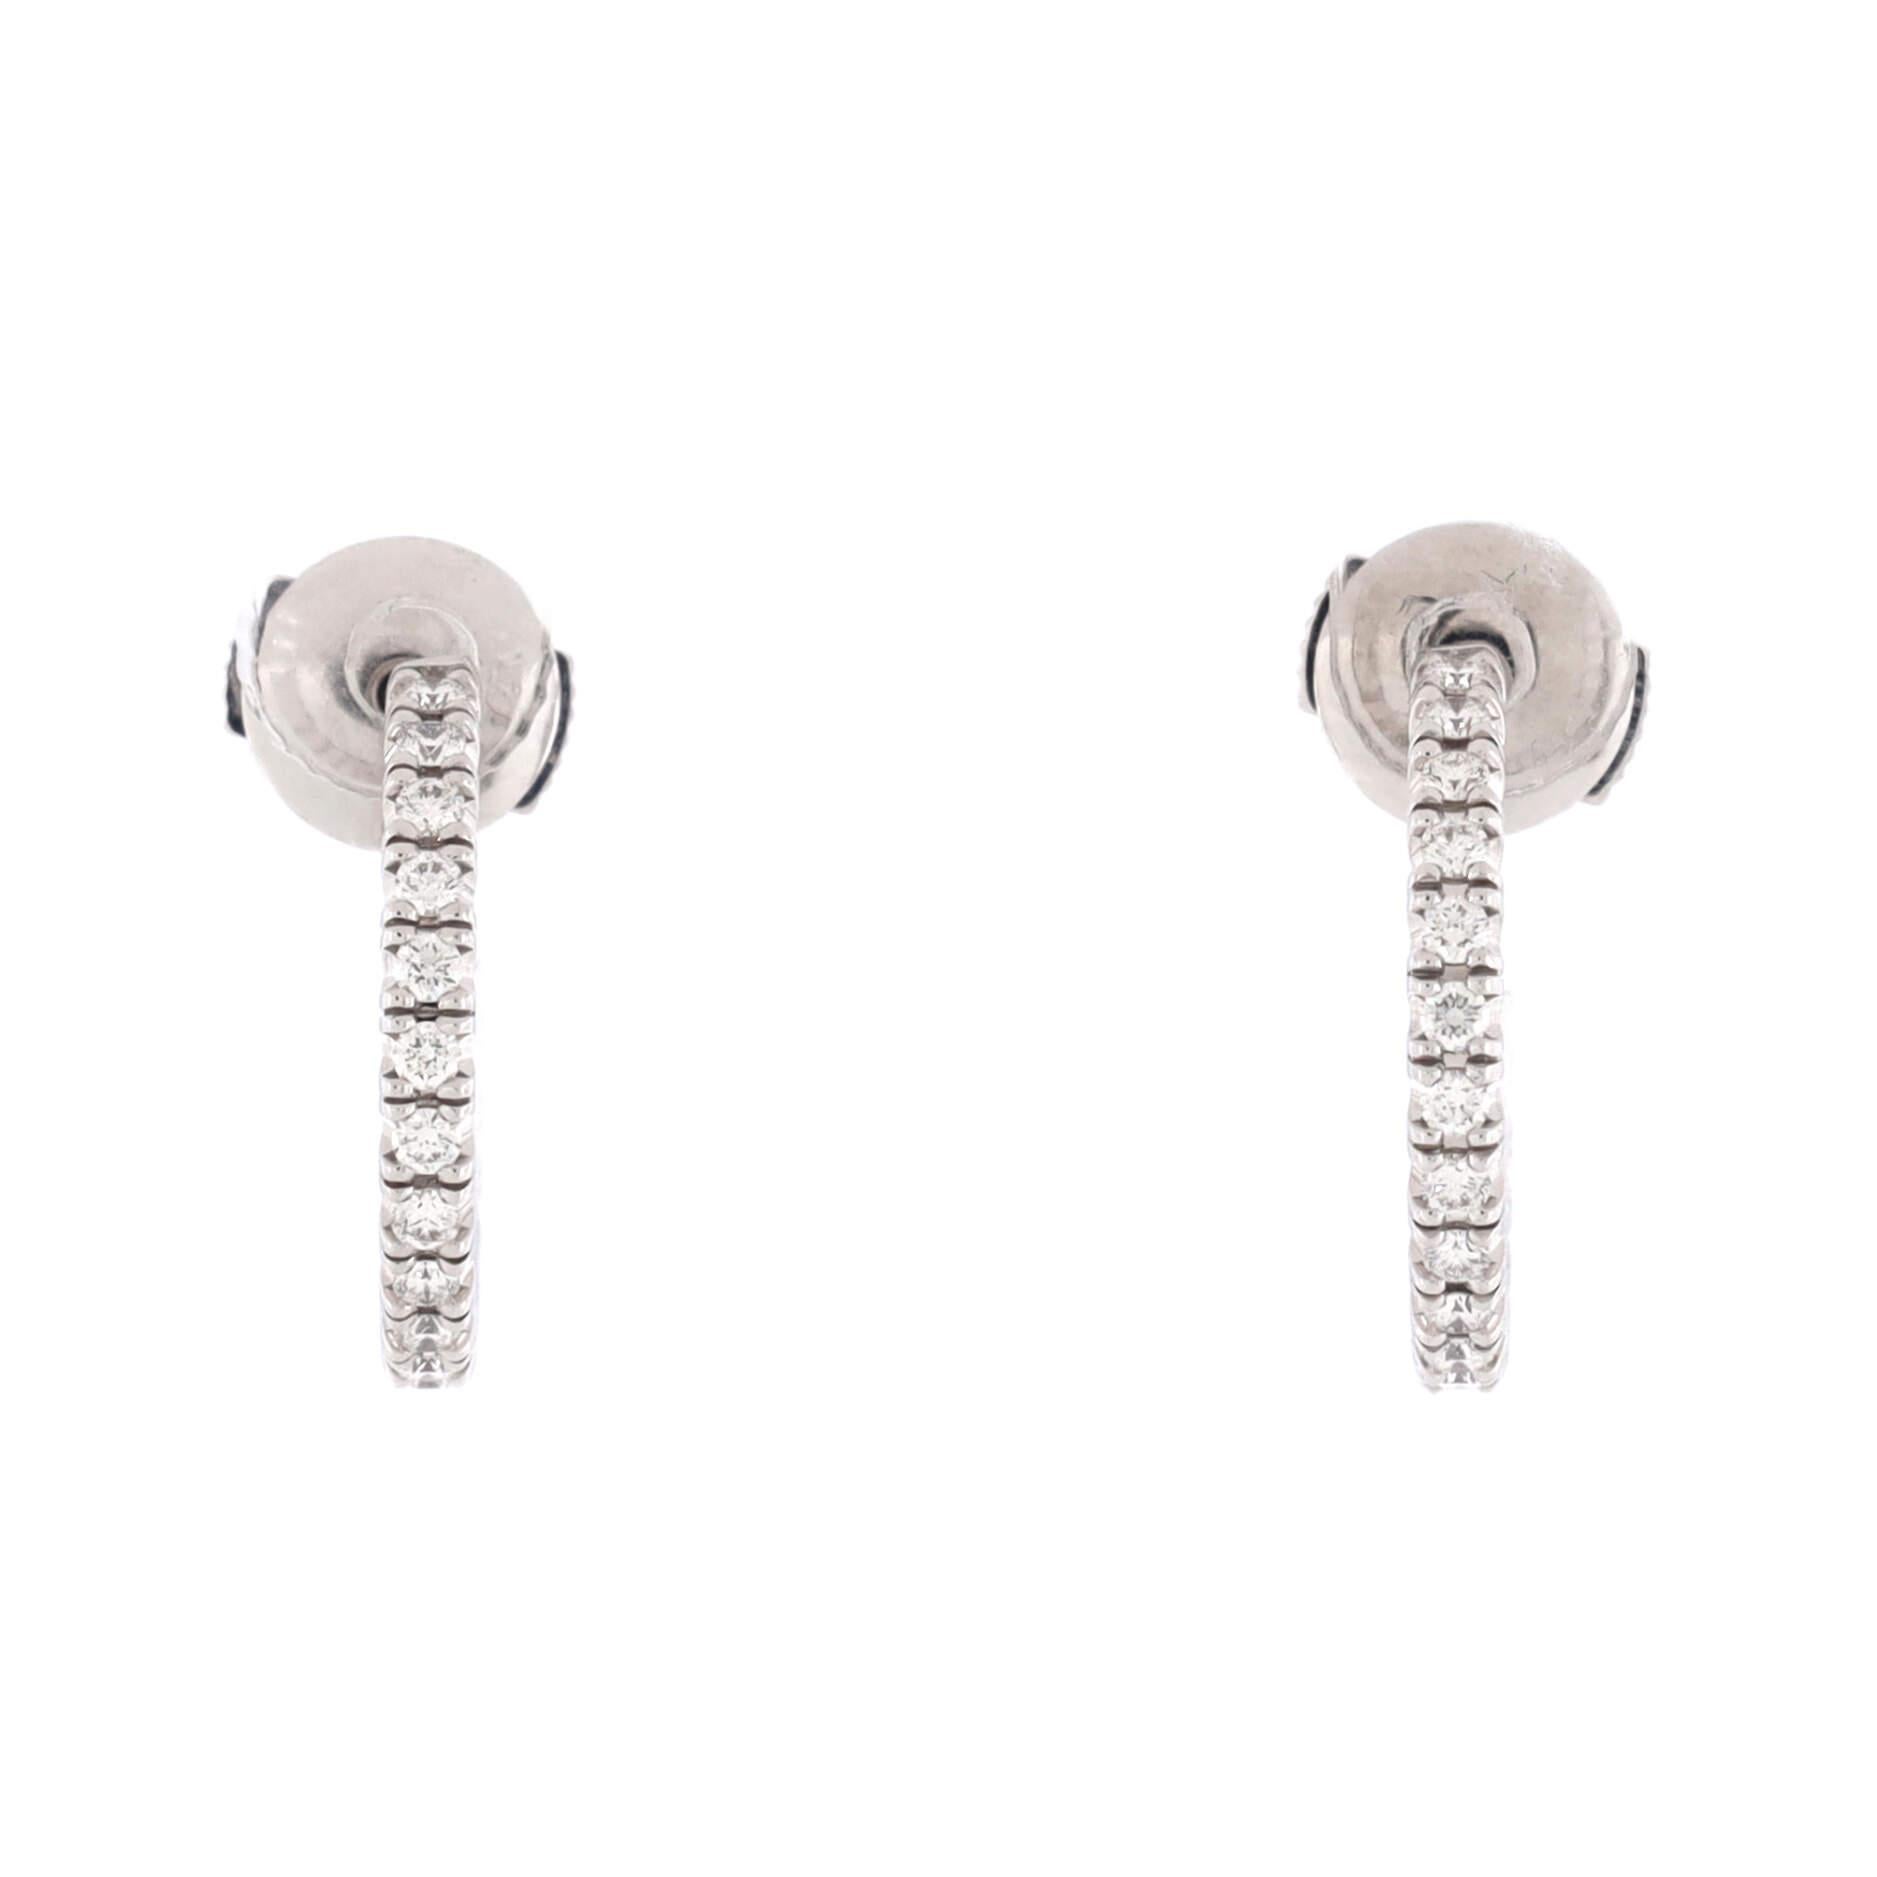 Condition: Great. Minor wear throughout.
Accessories: No Accessories
Measurements: Height/Length: 14.15 mm, Width: 1.80 mm
Designer: Cartier
Model: Etincelle De Cartier Hoop Earrings 18K White Gold and Diamonds Small
Exterior Color: White Gold
Item